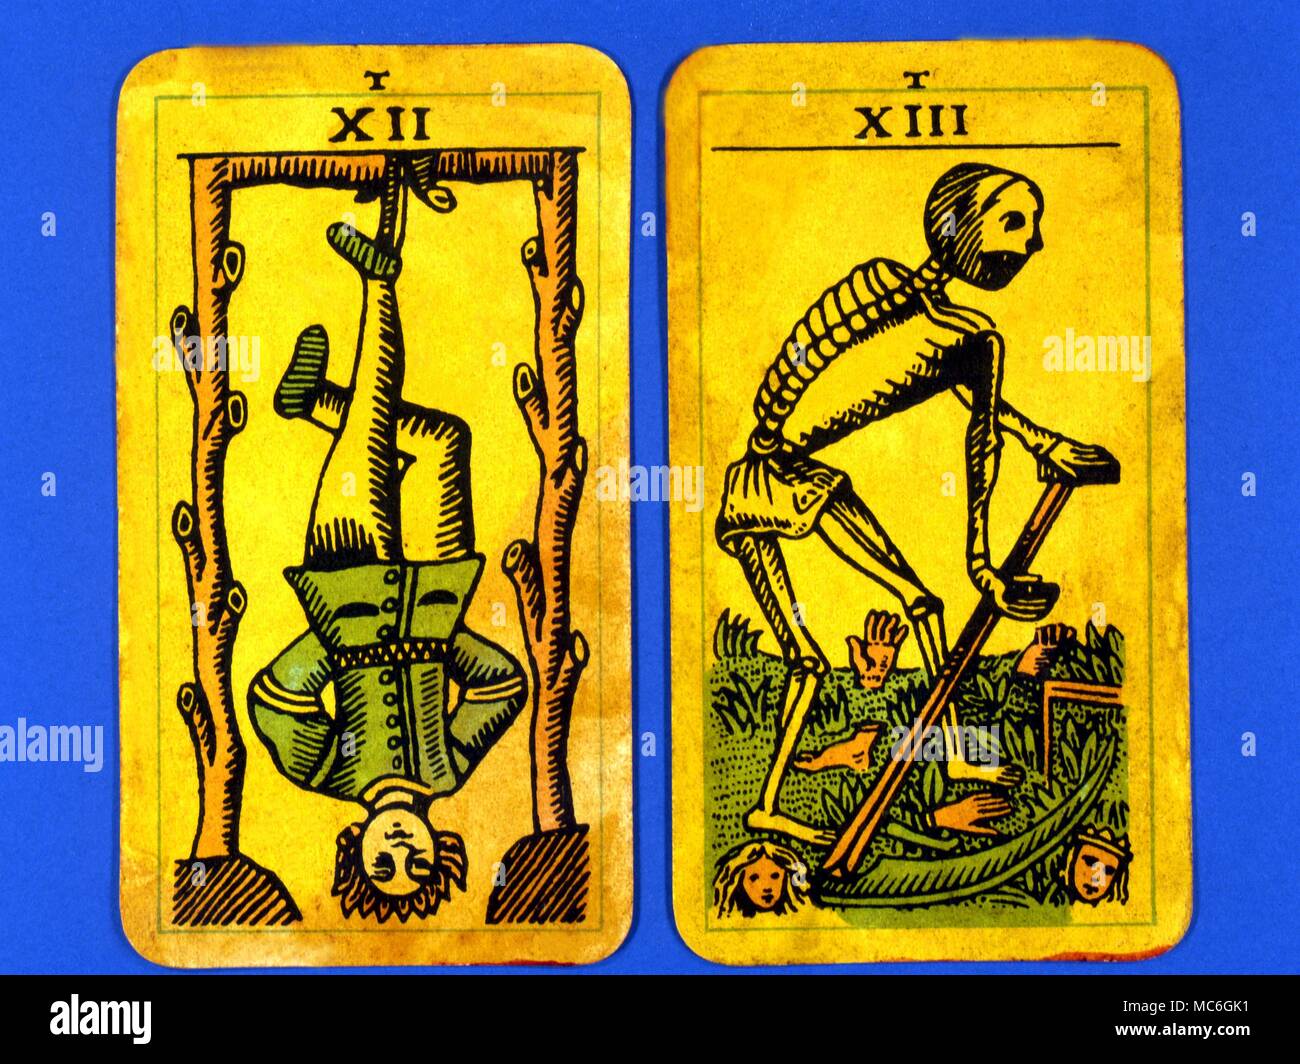 Tarot Cards-Majo Arcana- The Parisian Tarot. Card 10. The Wheel of Fortune, and Card 11. The Strength. Two cards from a Major Arcana picture Tarot,adapted by a Wiccan group. Probably designed in an archaizing style in loose imitation of the Rosicrucian deck designed by Pamela Coleman Smith, alongside A.E.Waite, and various earlier decks, such as that published by Encausse (Papus) in The Tarot of the Bohemians at the end of the 19th century, post 1905, but earlier than 1912. The name Parisian Tarot was given by the owner of the deck - it might however be called the Tau Tarot, from the intrigui Stock Photo